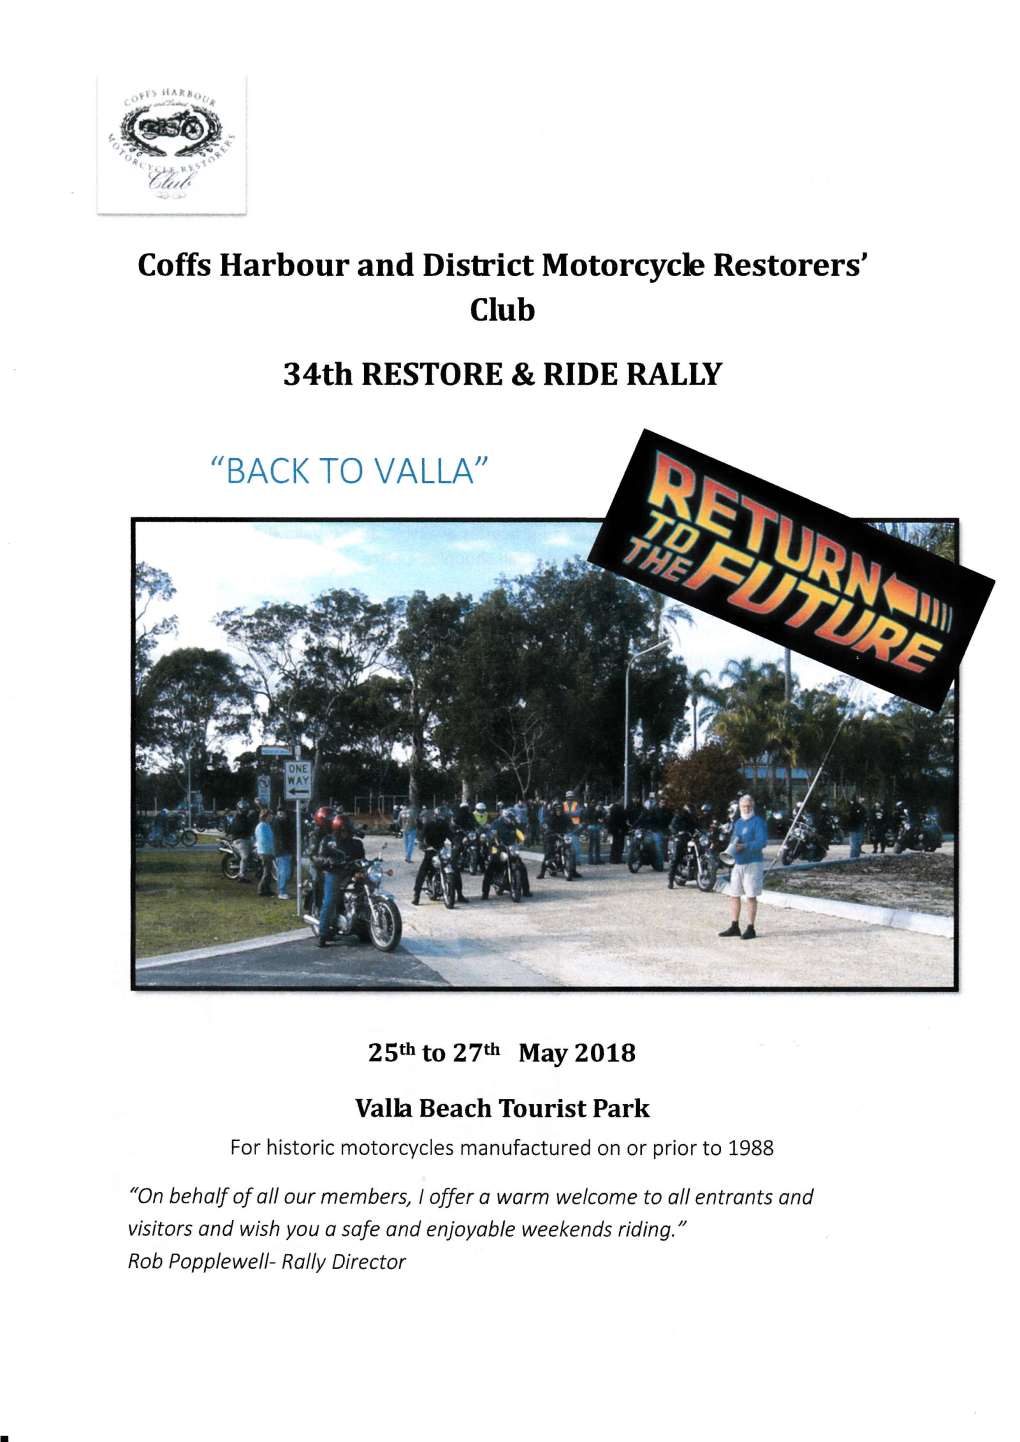 Coffs Harbour and District Motorcycle Restorers' Club